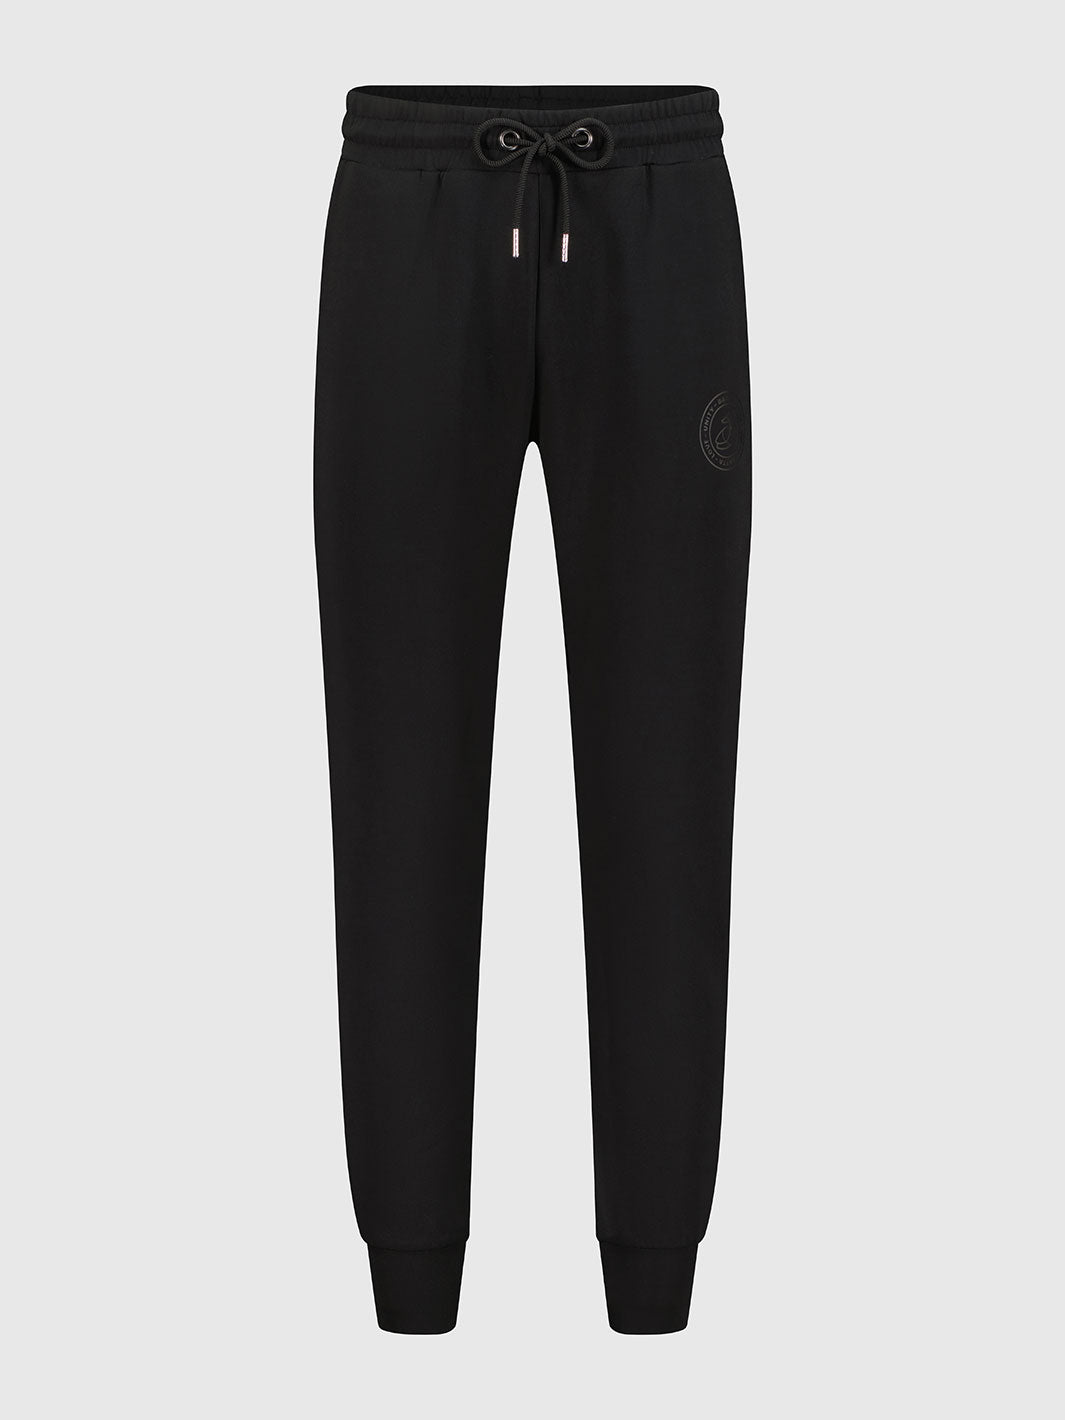 Women Limited Edition Pant